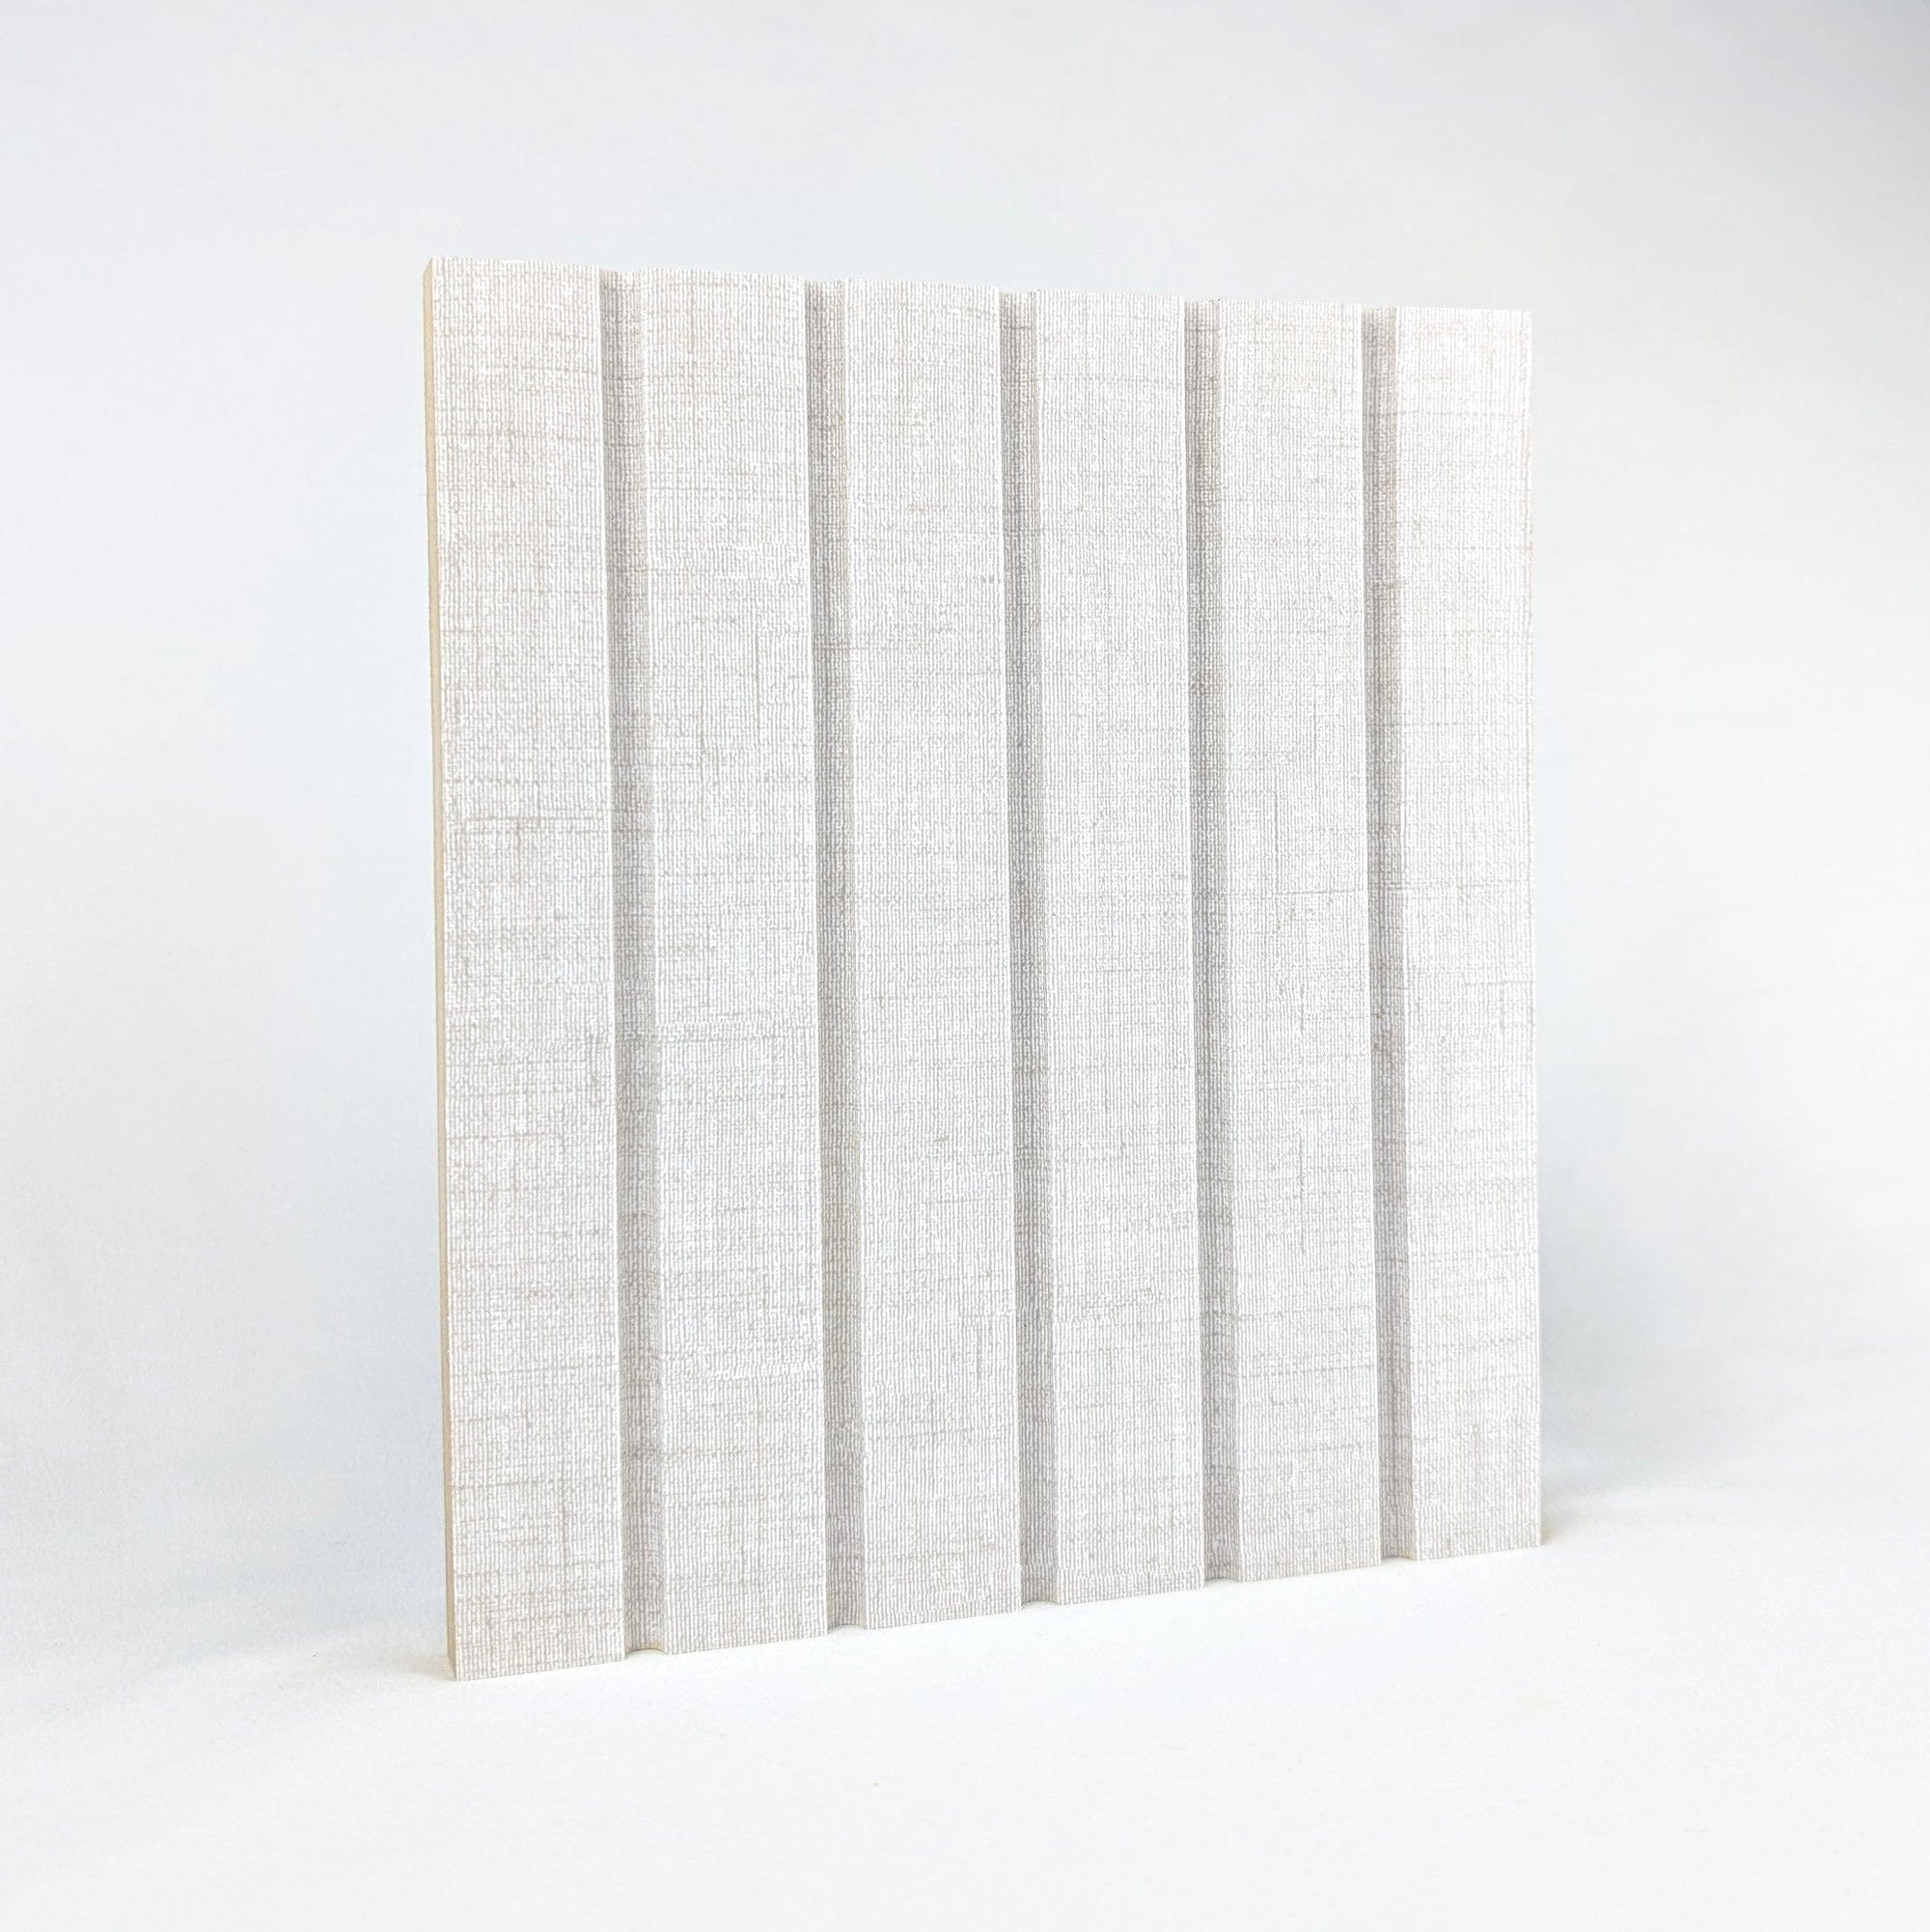 Walston Architectural Products Wall Panel Slat Wall Panels - 1" Slats Slat Wall Panels - 1" Slats | Walston Door Company | Shop